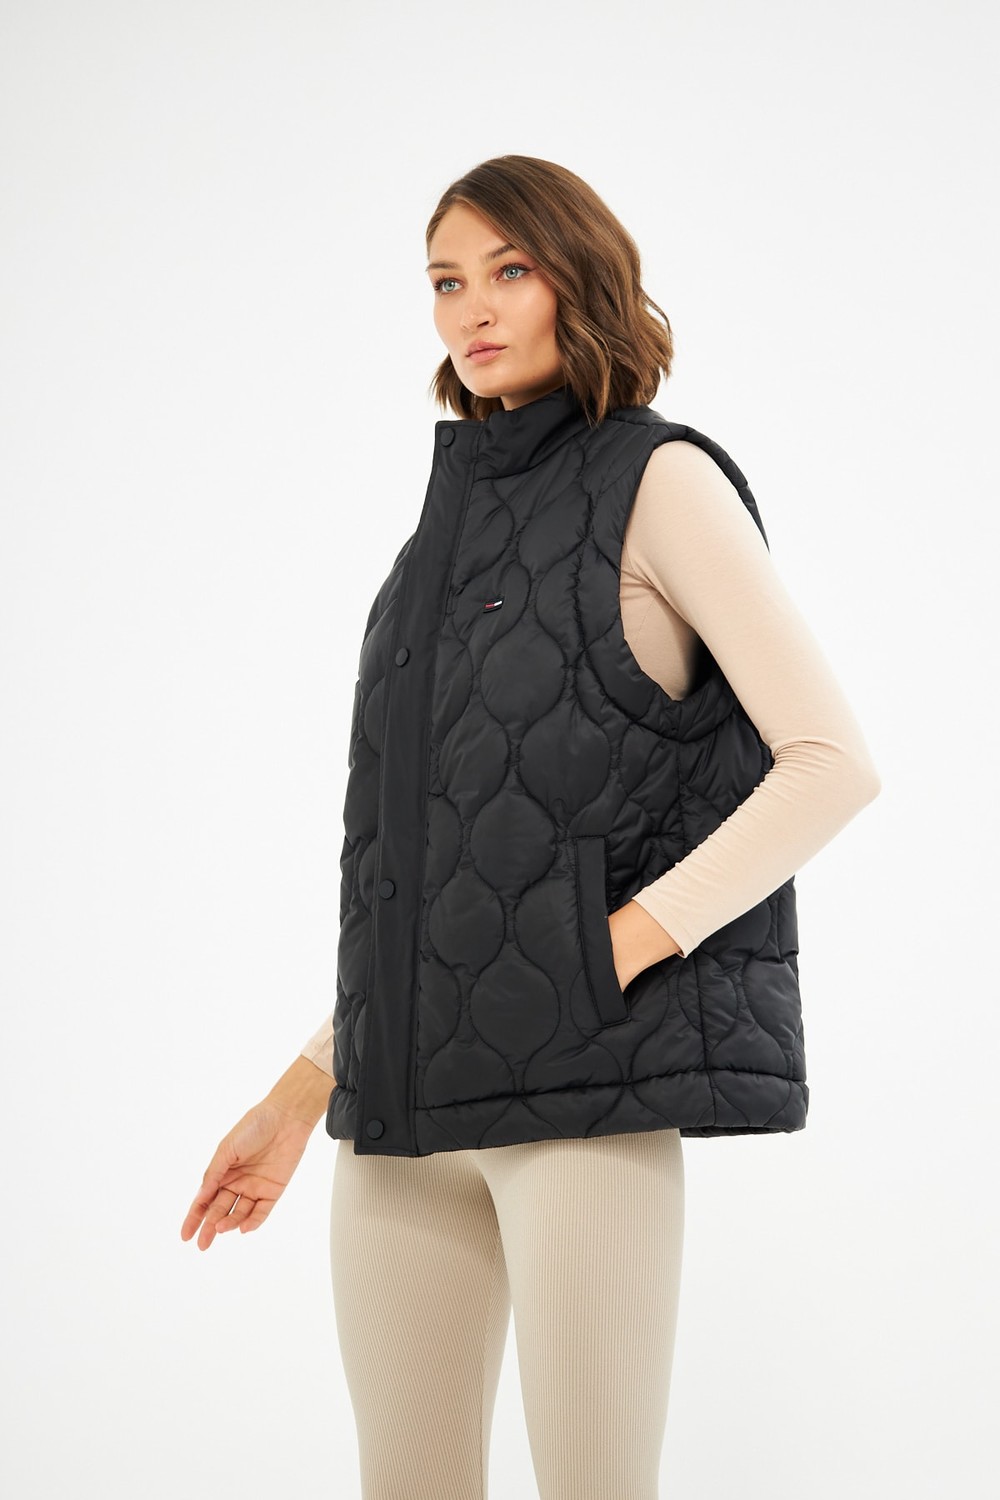 D1fference Women's Water And Windproof Onion Pattern Quilted Black Vest.